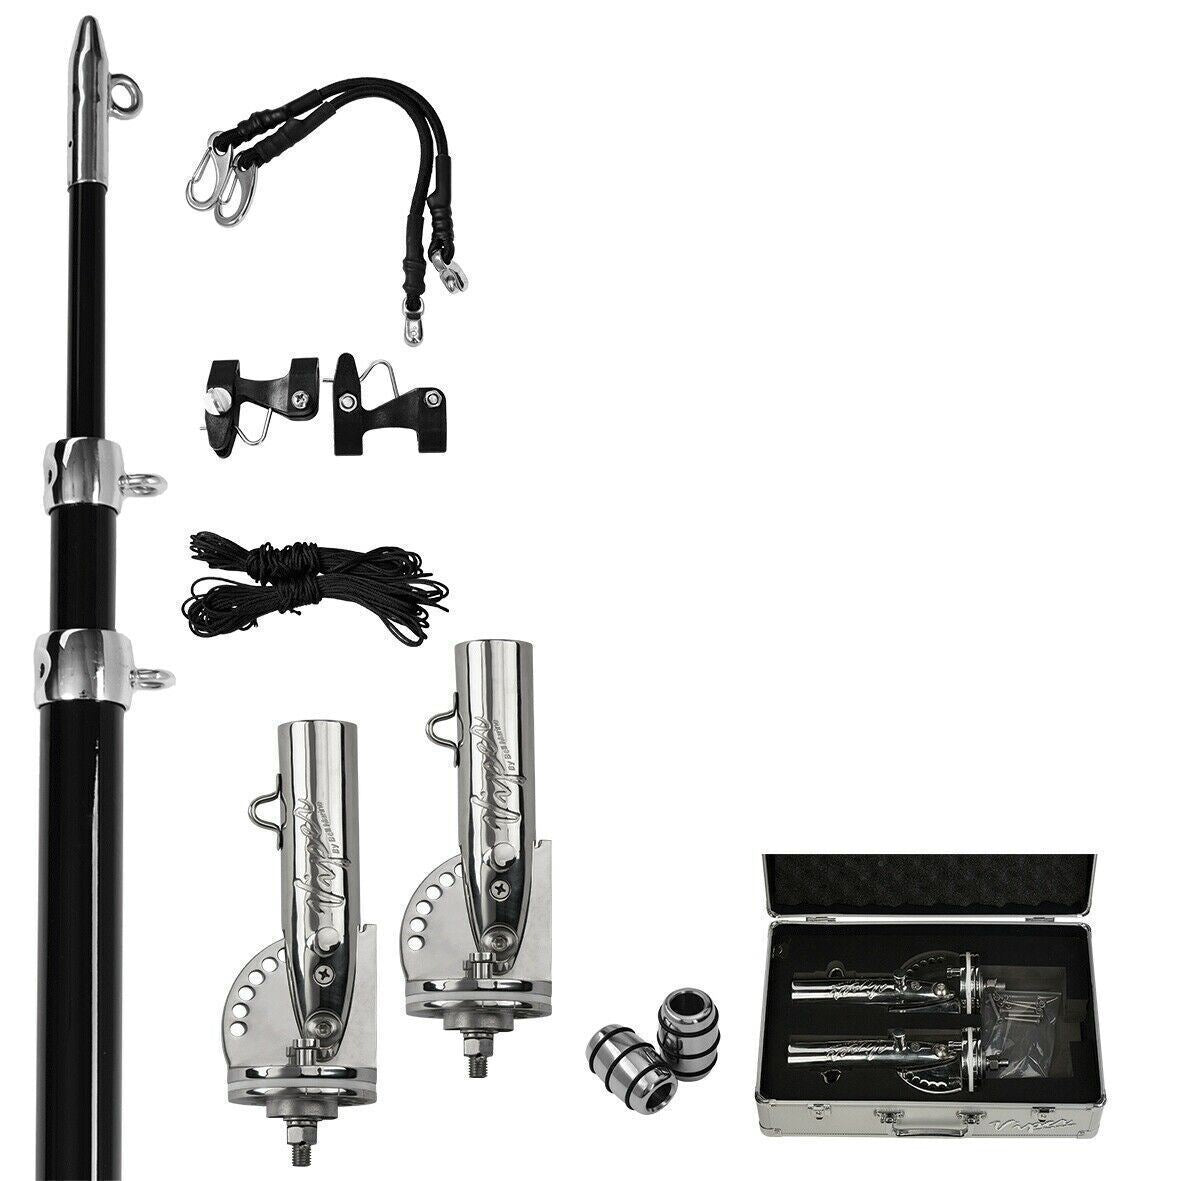 BELL MARINE VIPER PRO SERIES II SIDE MOUNT TELESCOPIC OUTRIGGER BUNDLE - 80013